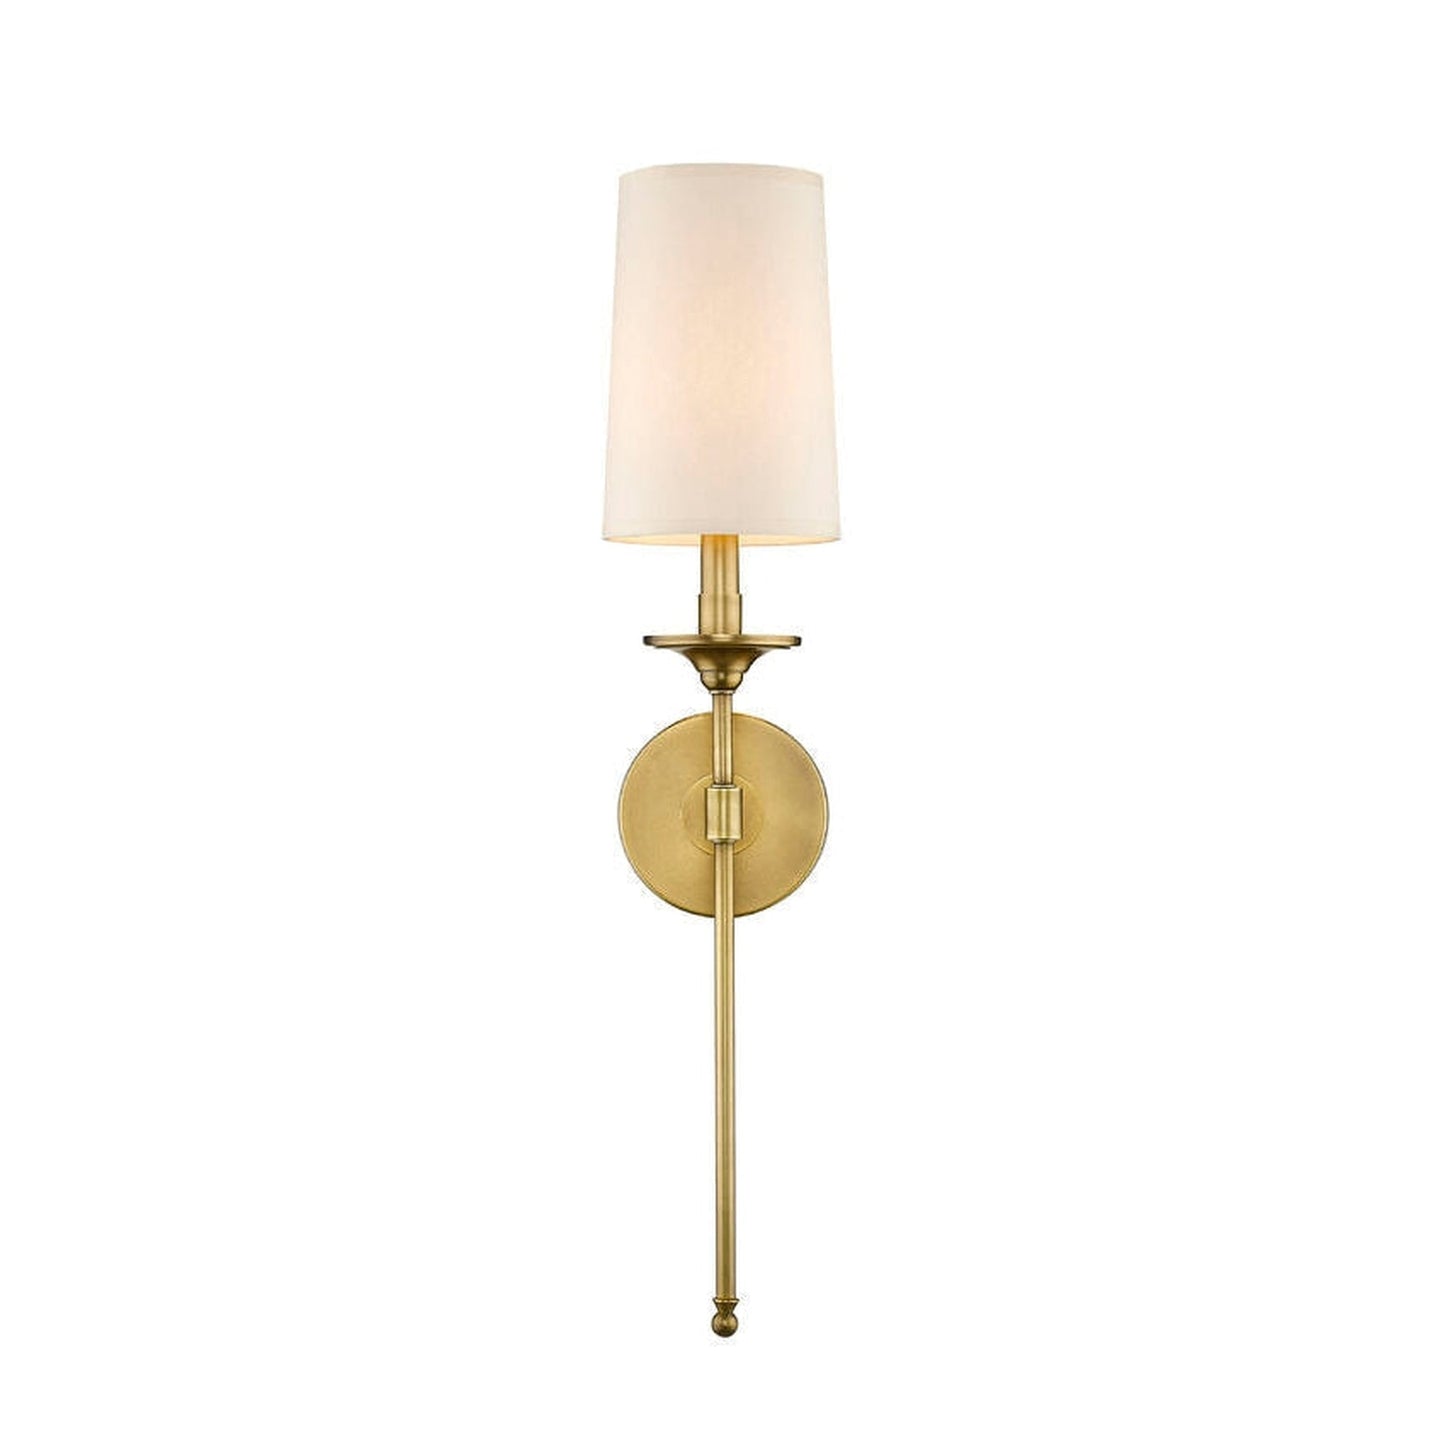 Z-Lite Emily 6" 1-Light Rubbed Brass Wall Sconce With Beige Parchment Paper Shade